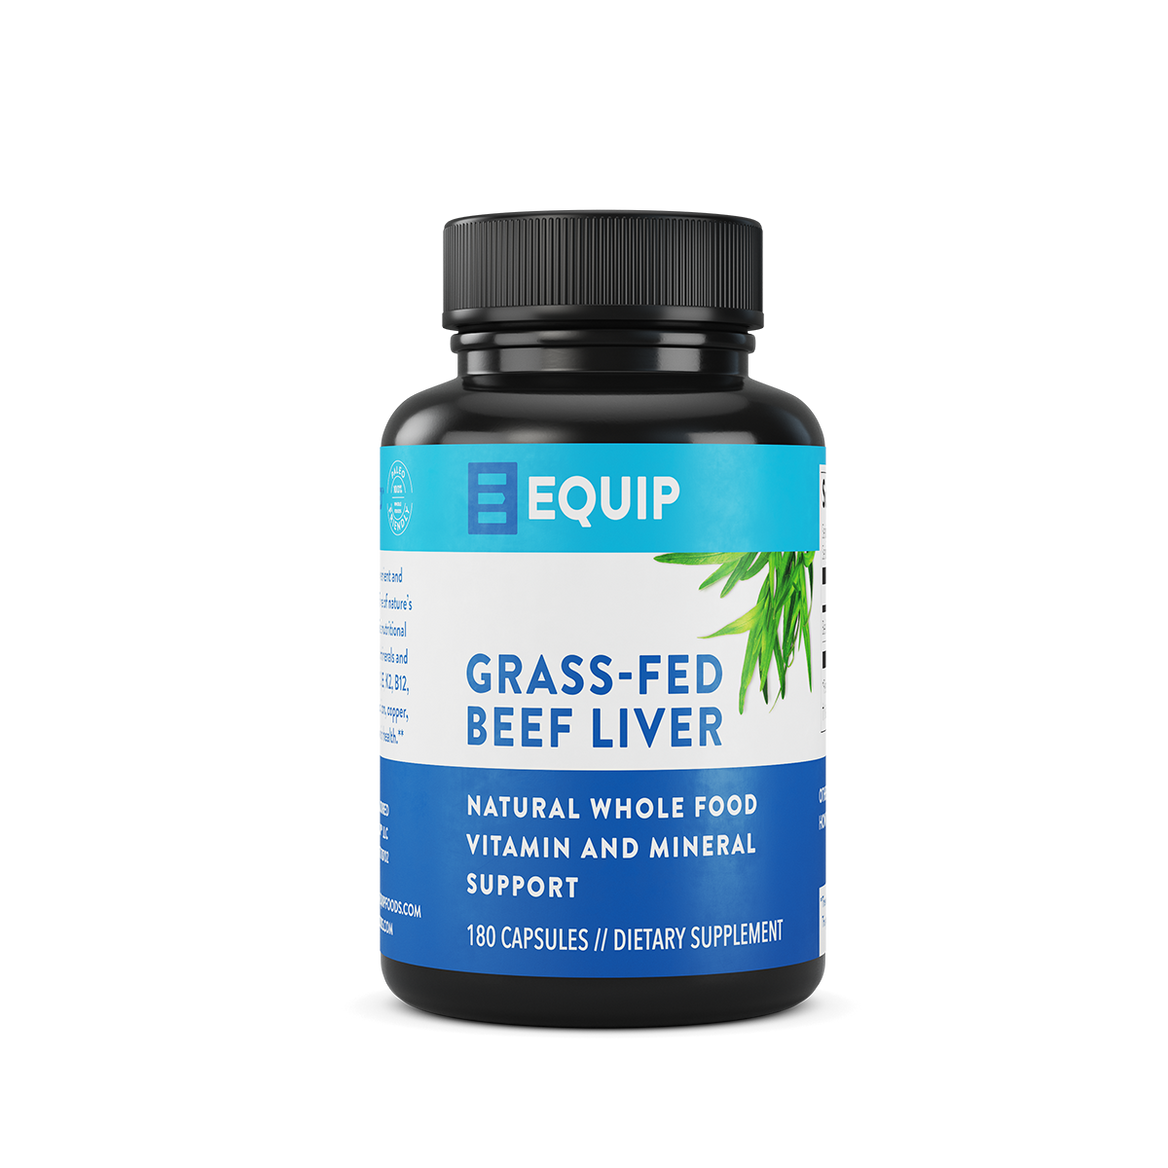 Grass-Fed Beef Liver Capsules